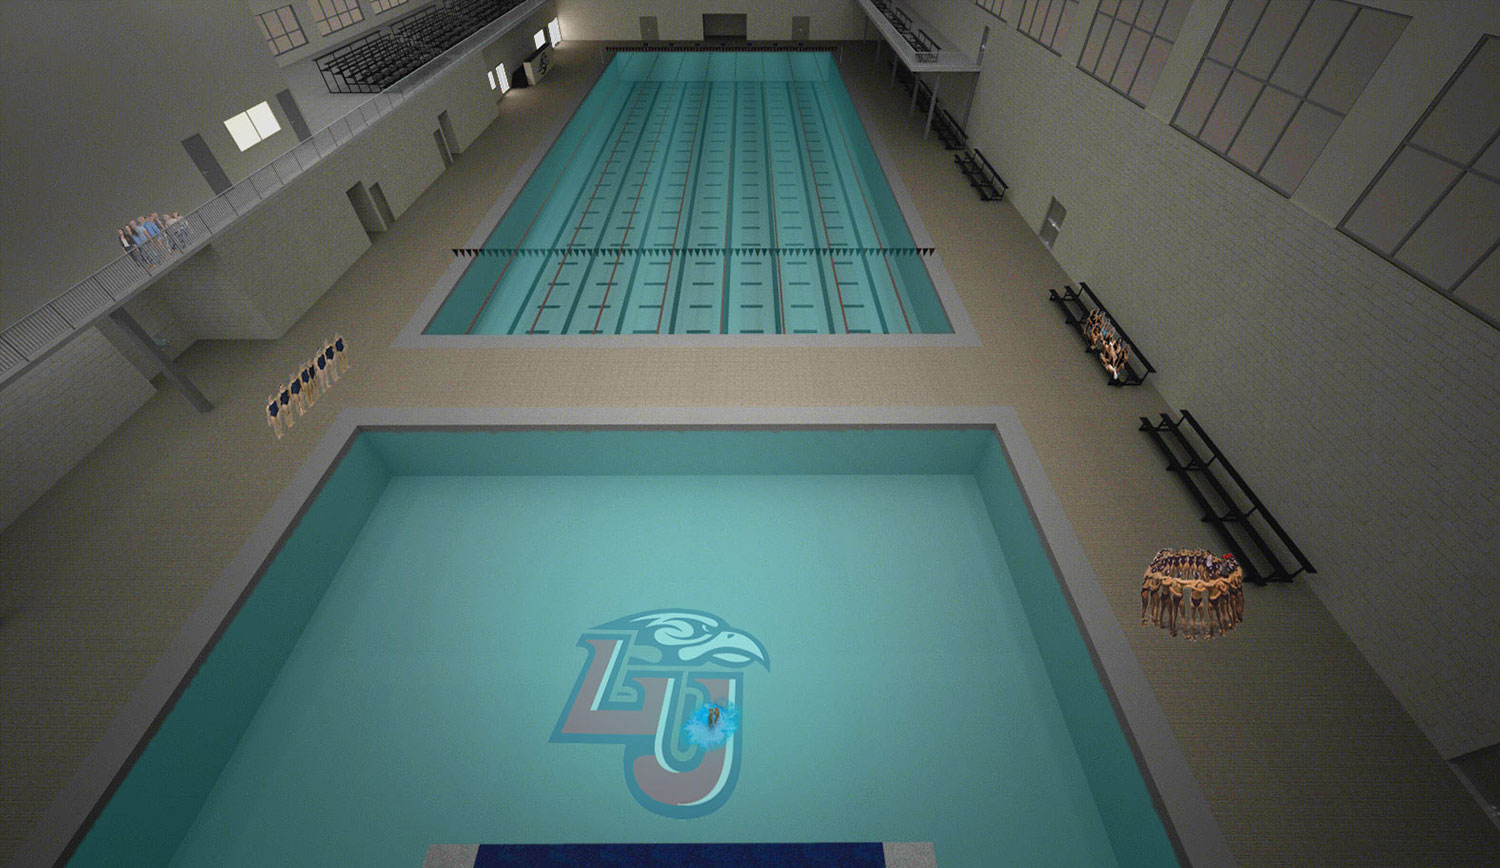 An inside view of the forthcoming LU Natatorium from the perspective of the 10-meter diving platform overlooking the 17-foot-deep diving well and the 50-meter Olympic-distance long-course pool.